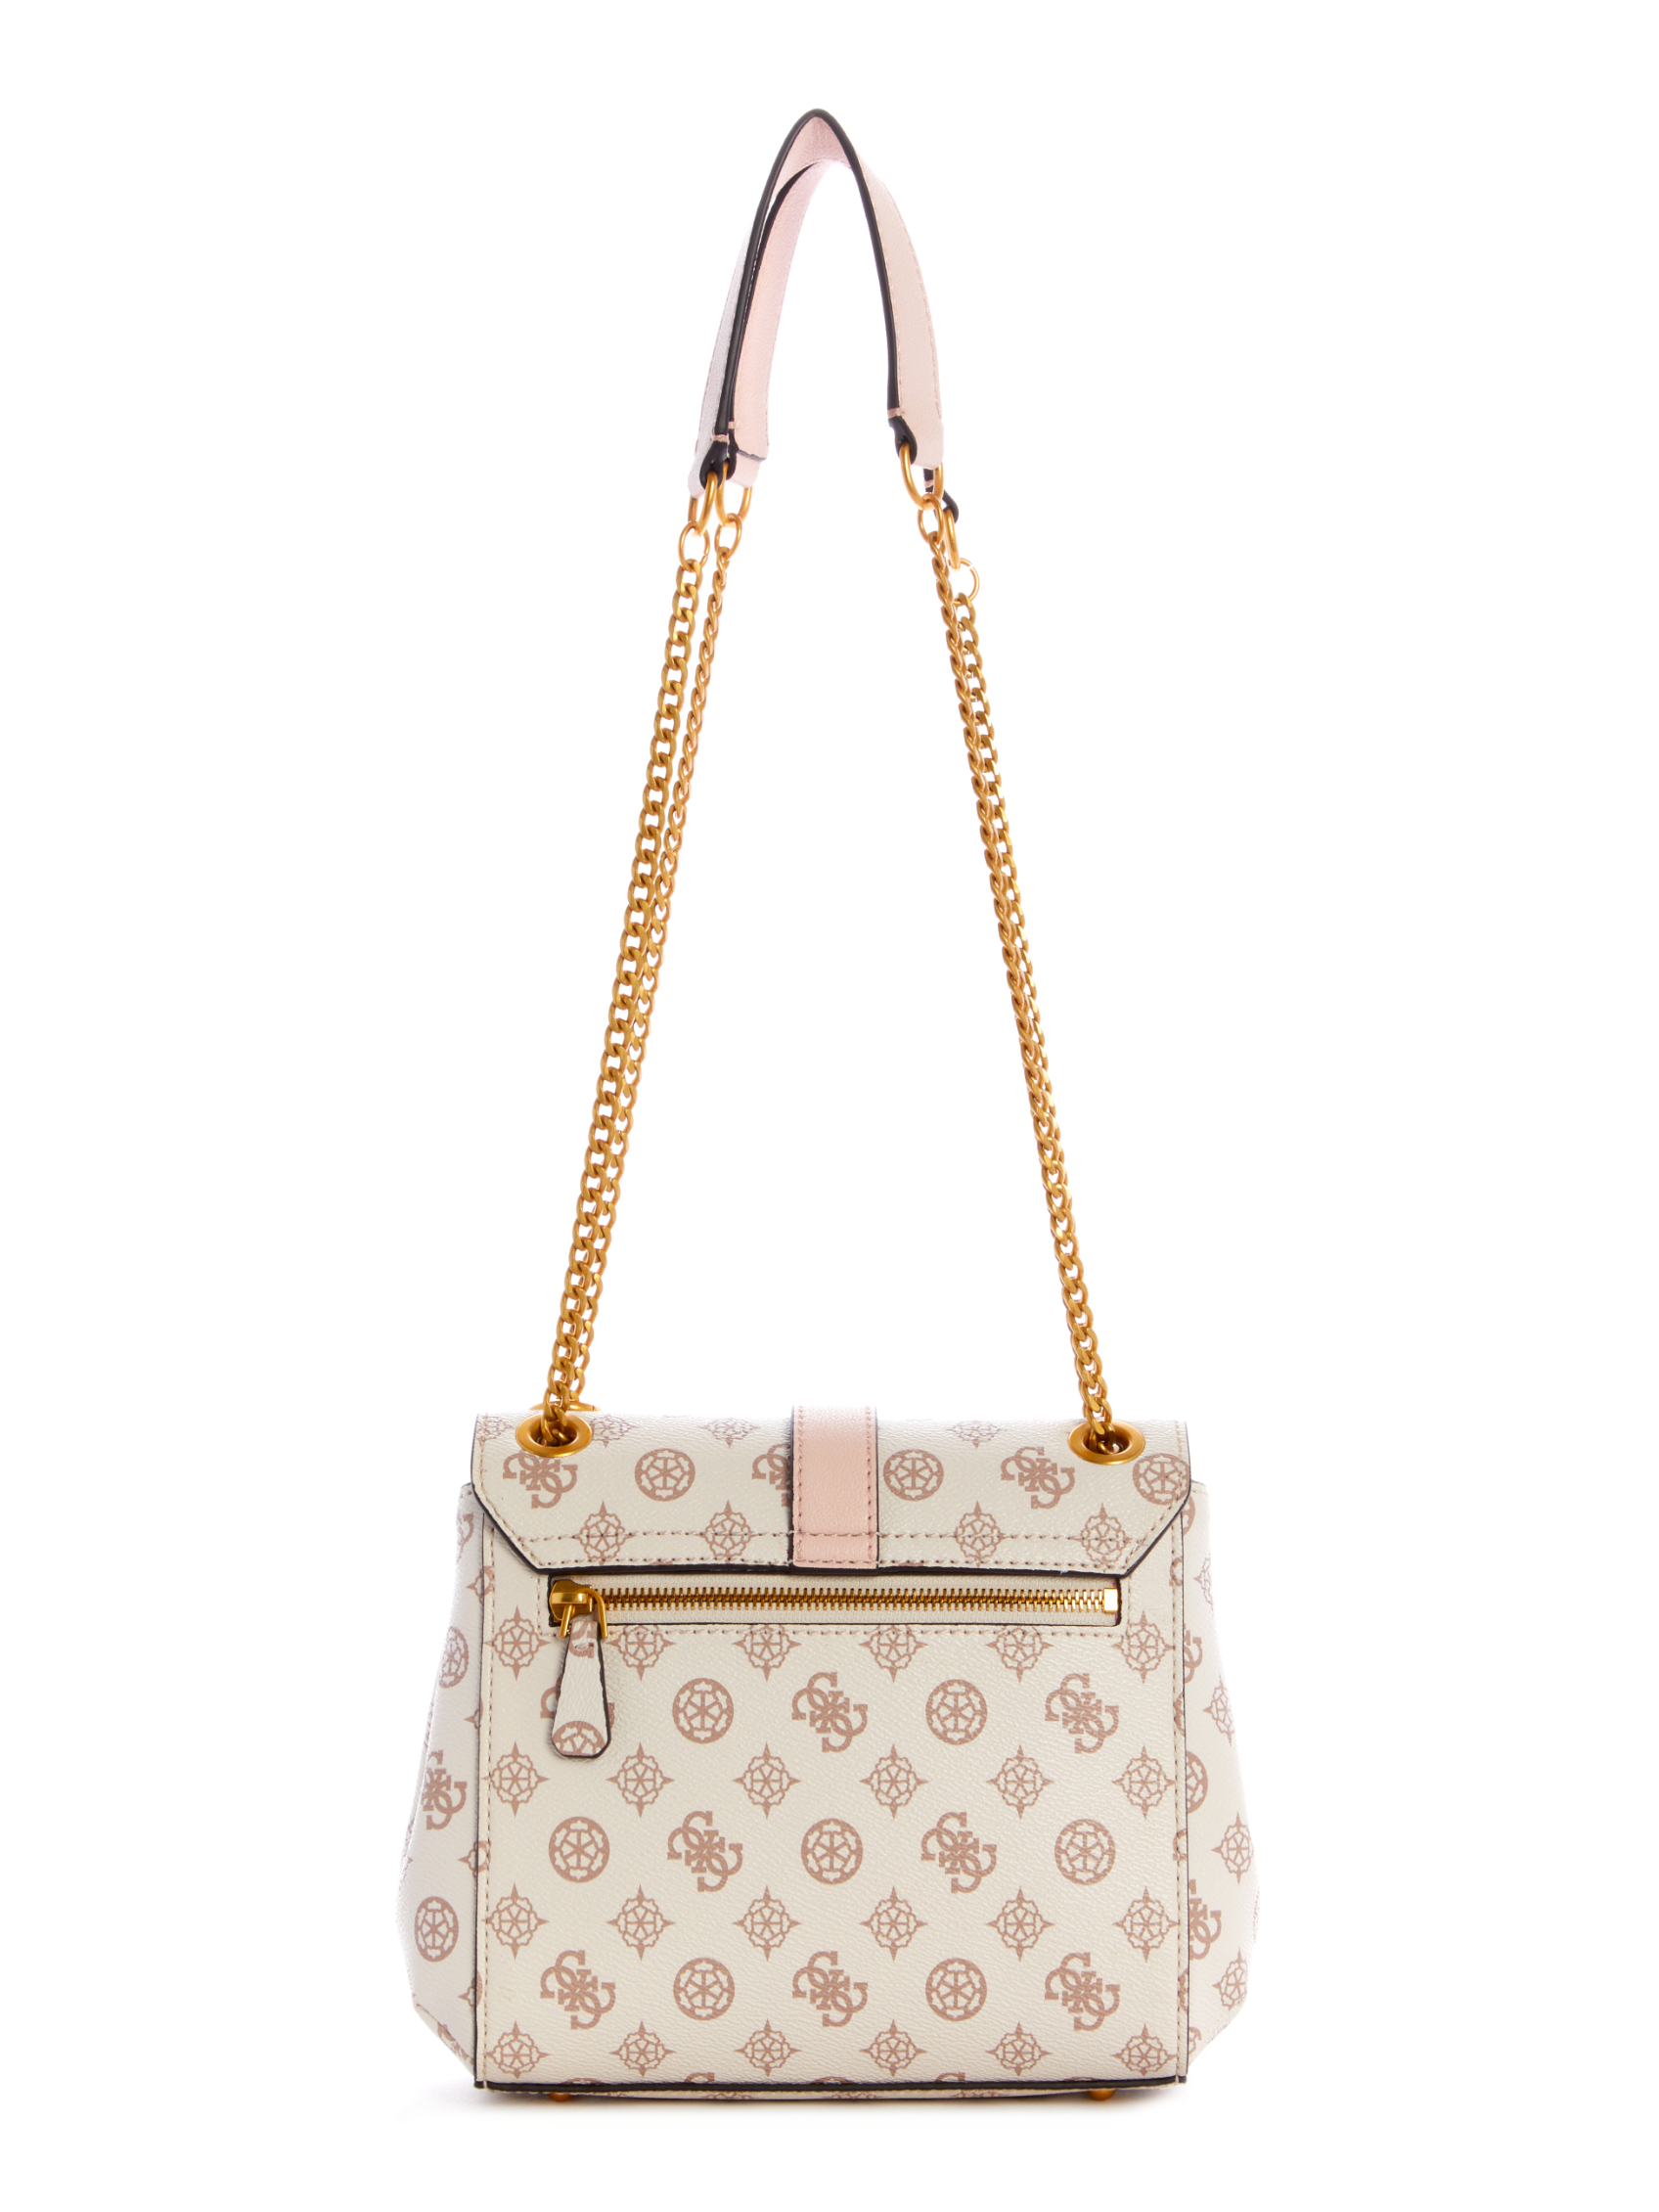 BRIANA CONVERTIBLE CROSSBODY FLAP | Guess Philippines